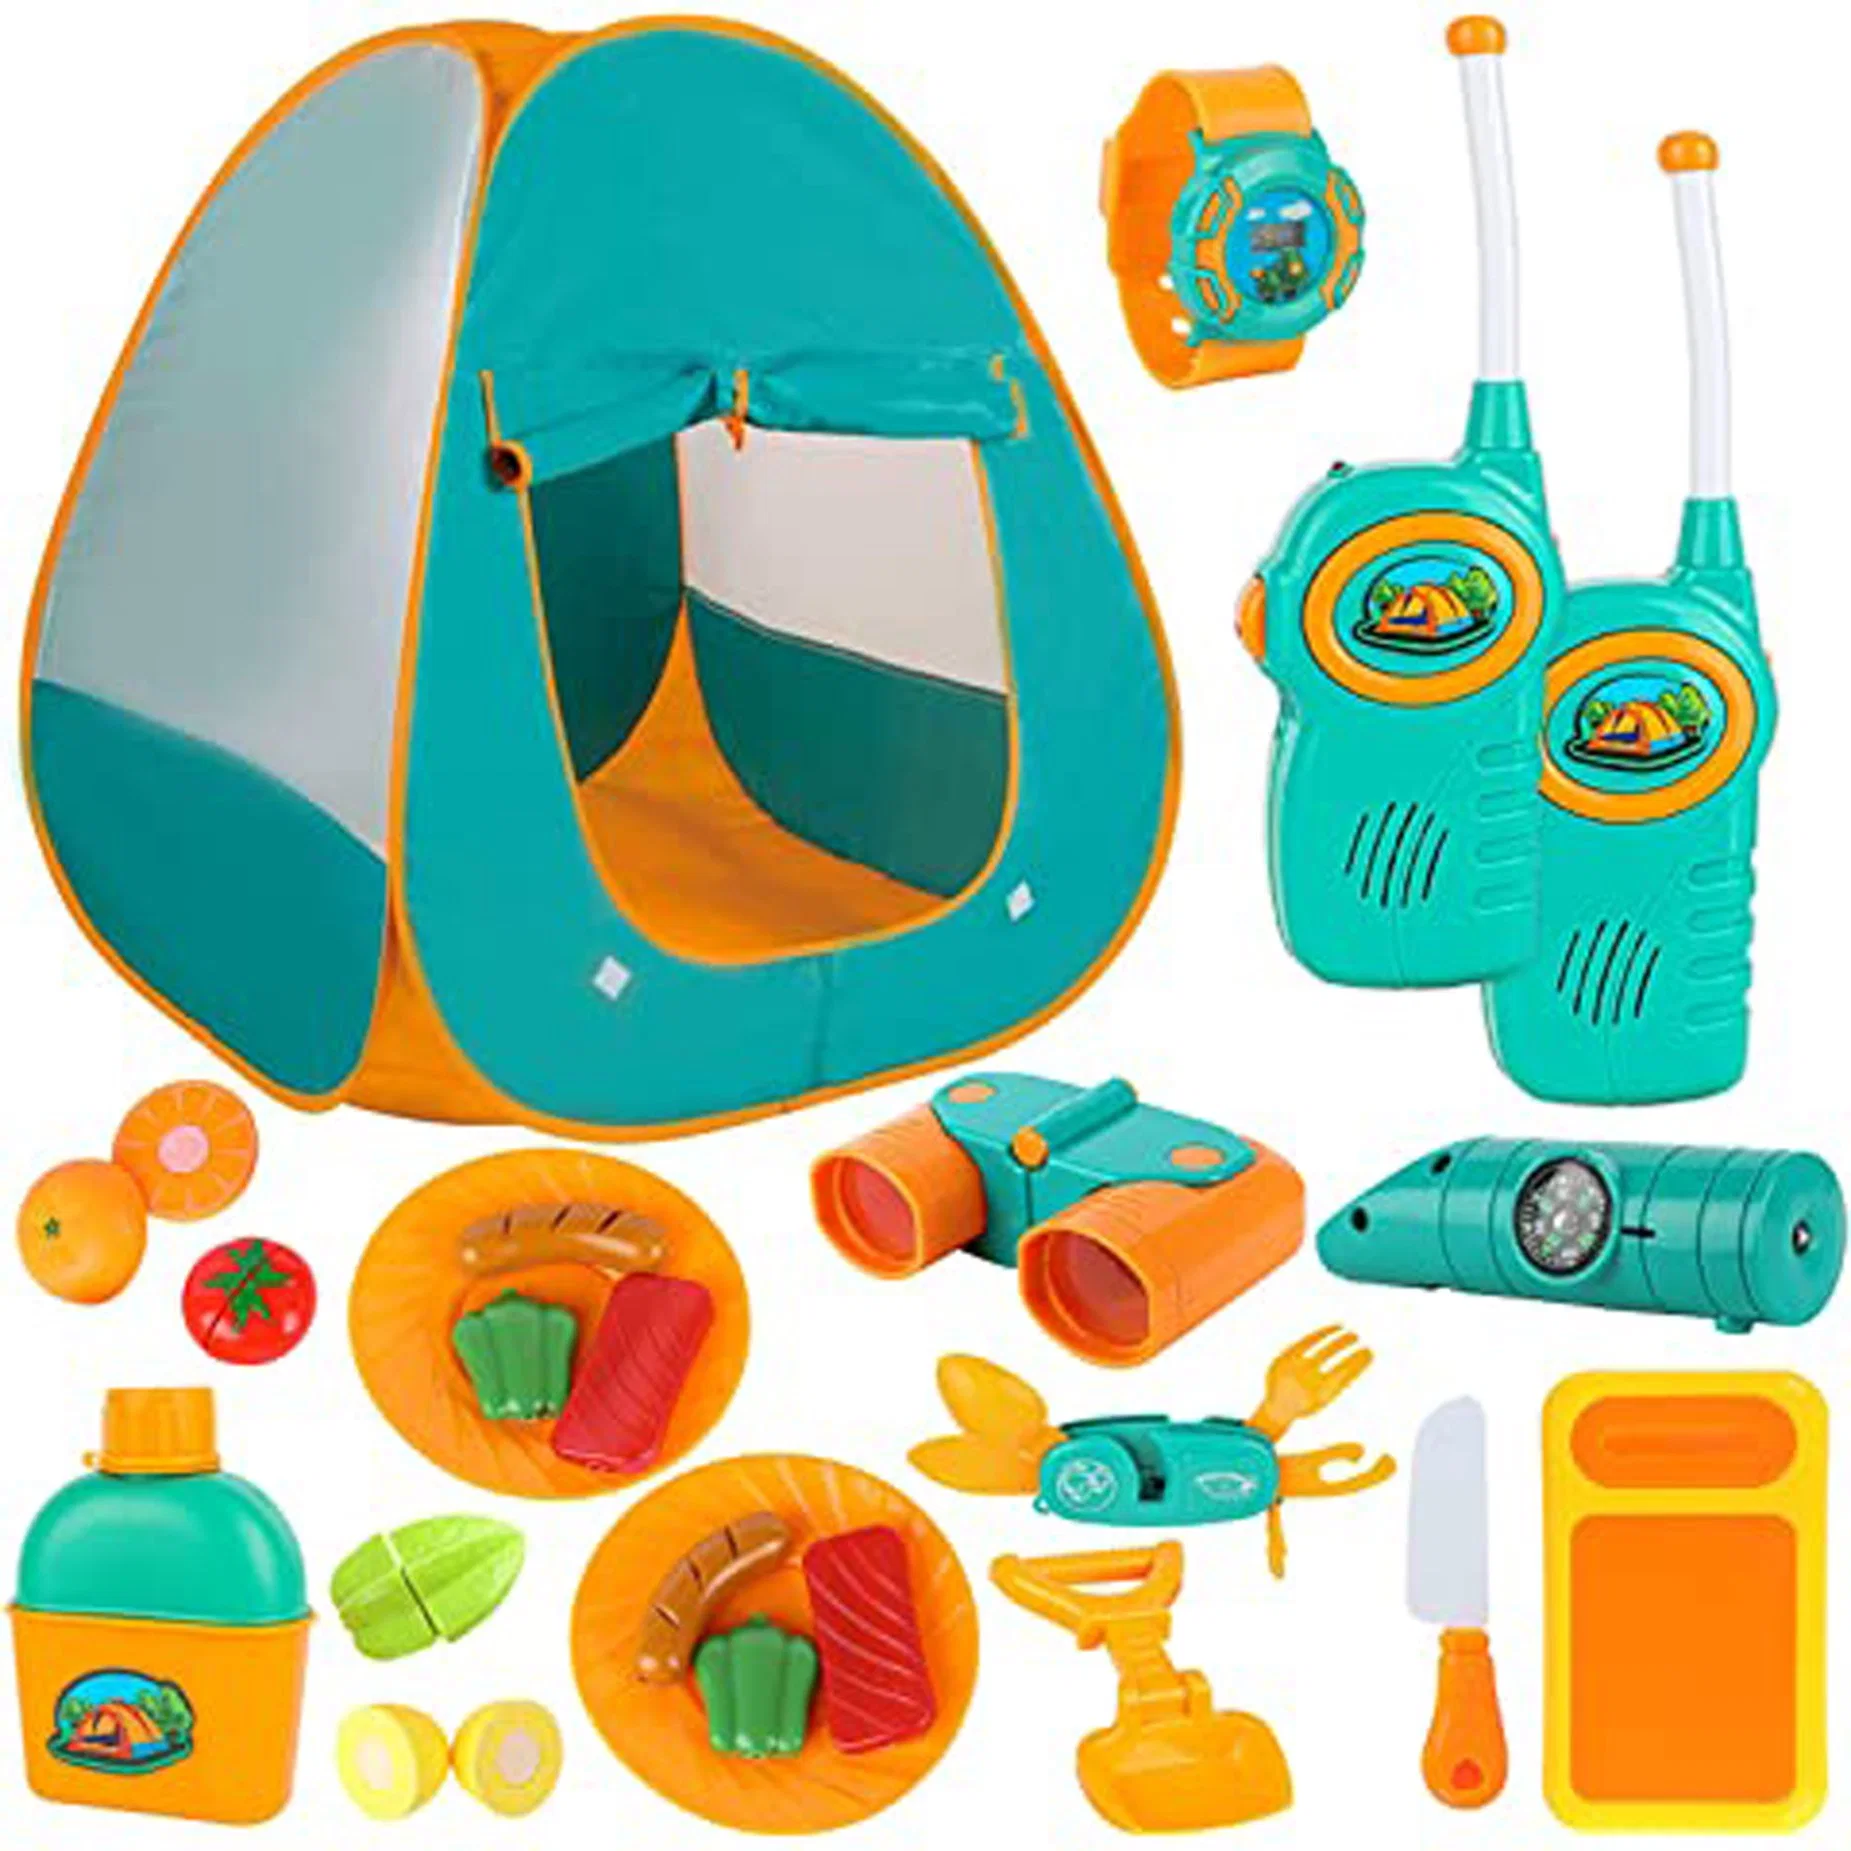 Pop up Tent with Kids Camping Gear Set Outdoor Toys Camping Tools Set for Kids Kids Play Tent Toy